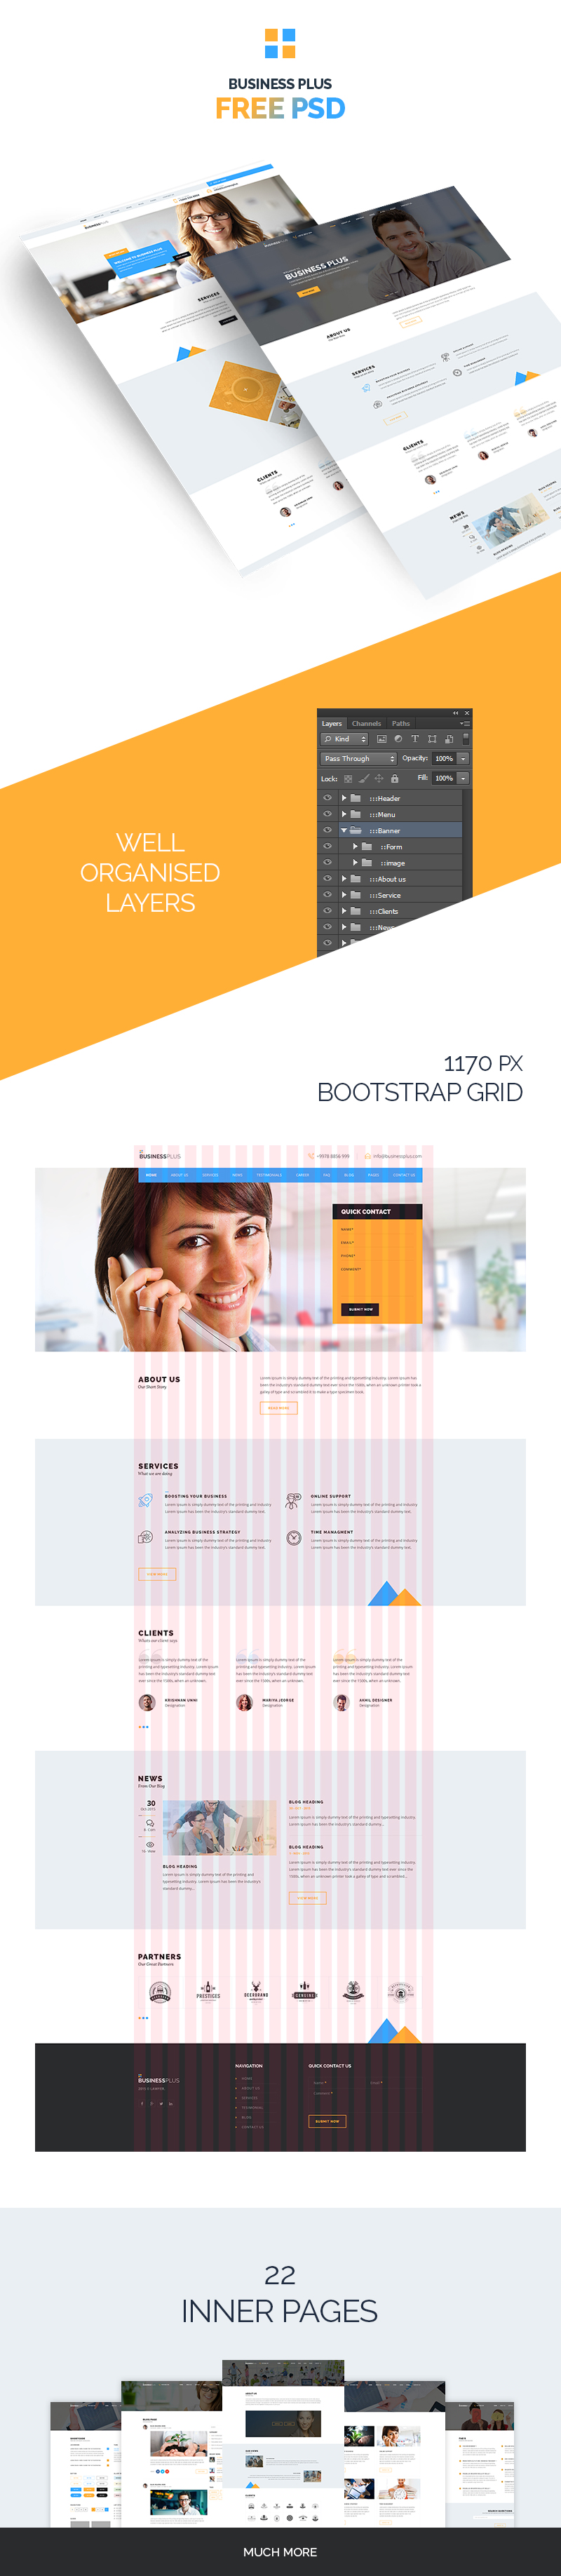 businessplus-psd-template-preview